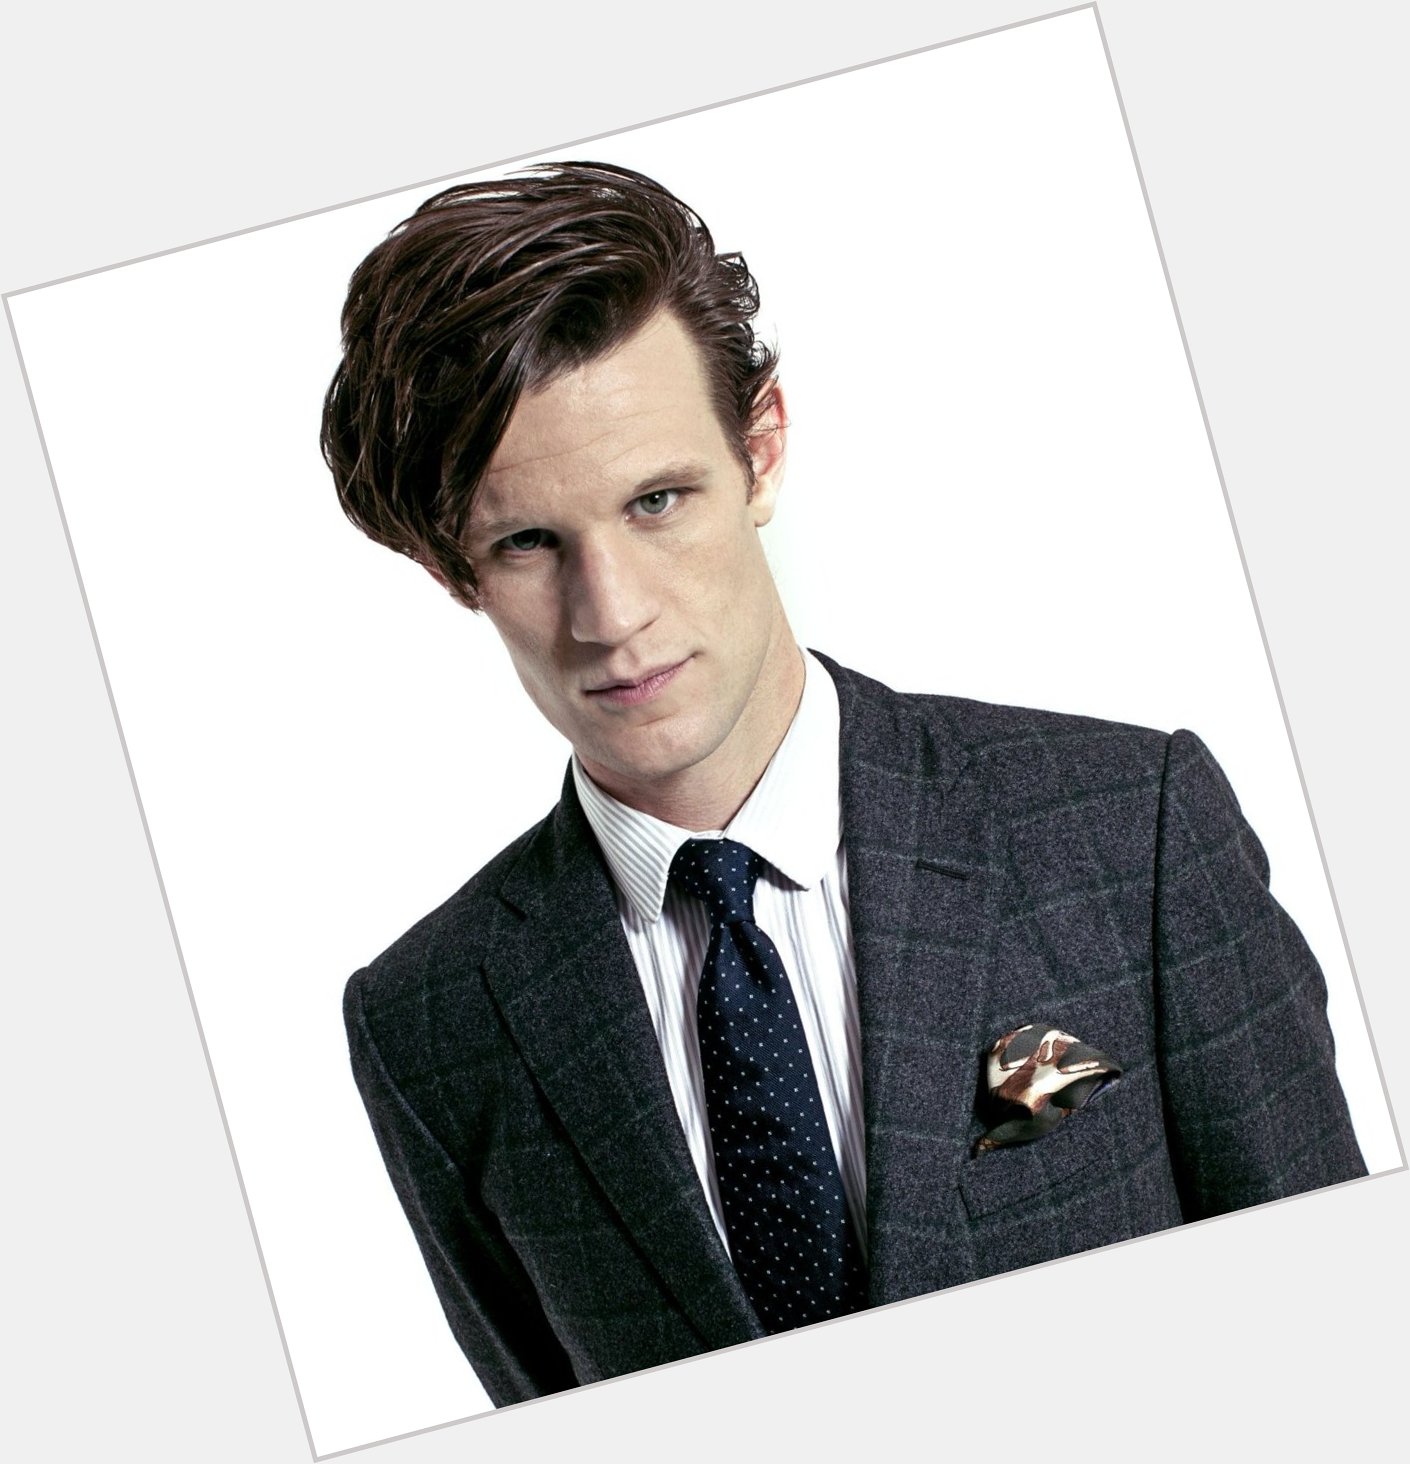 A very happy birthday to Doctor Number 11, Matt Smith, who turns 35 today 